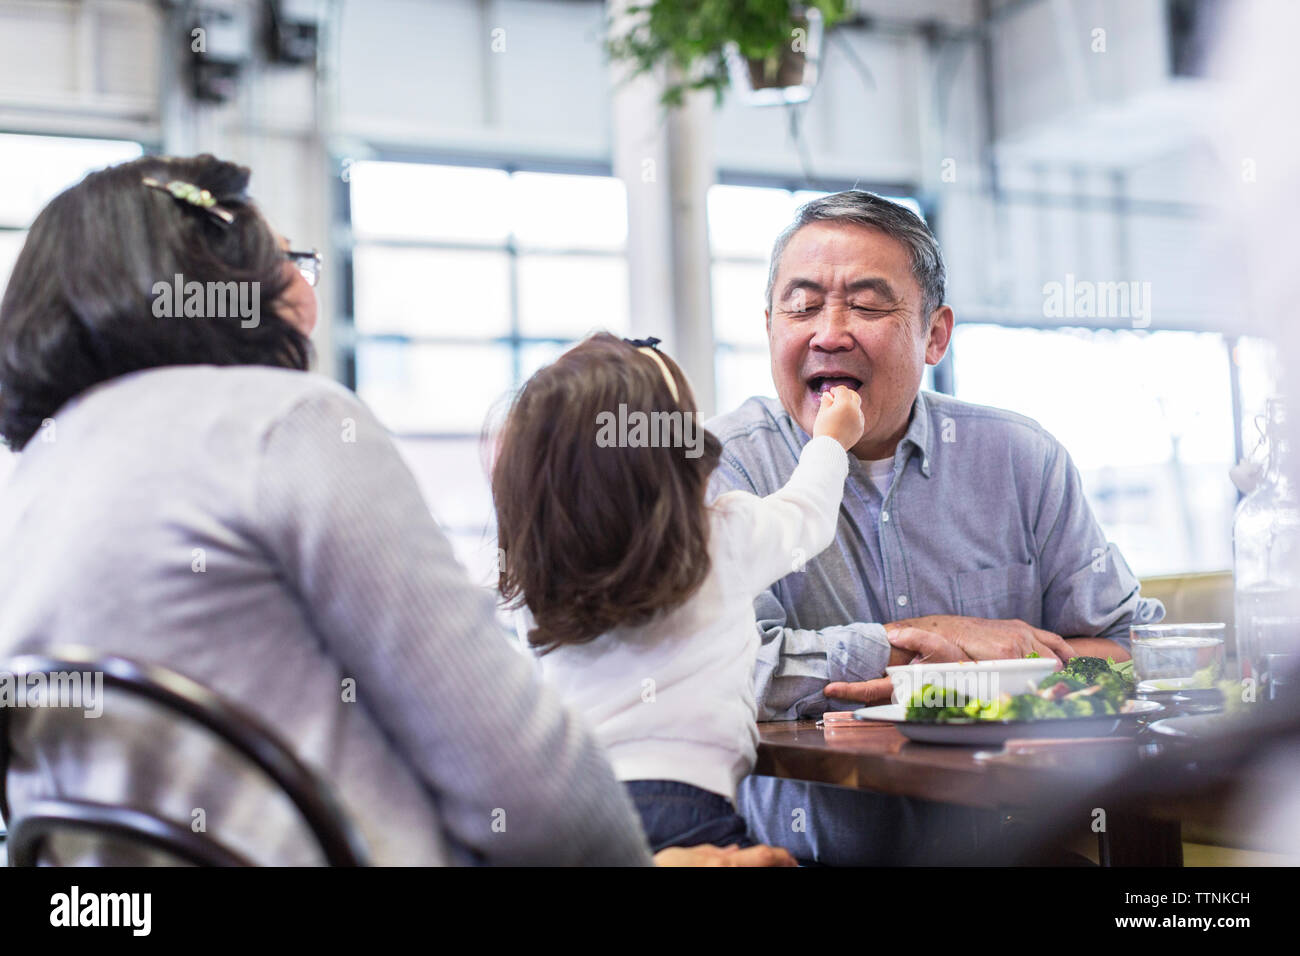 Girl feeding grandfather while sitting with grandmother at table in restaurant Stock Photo